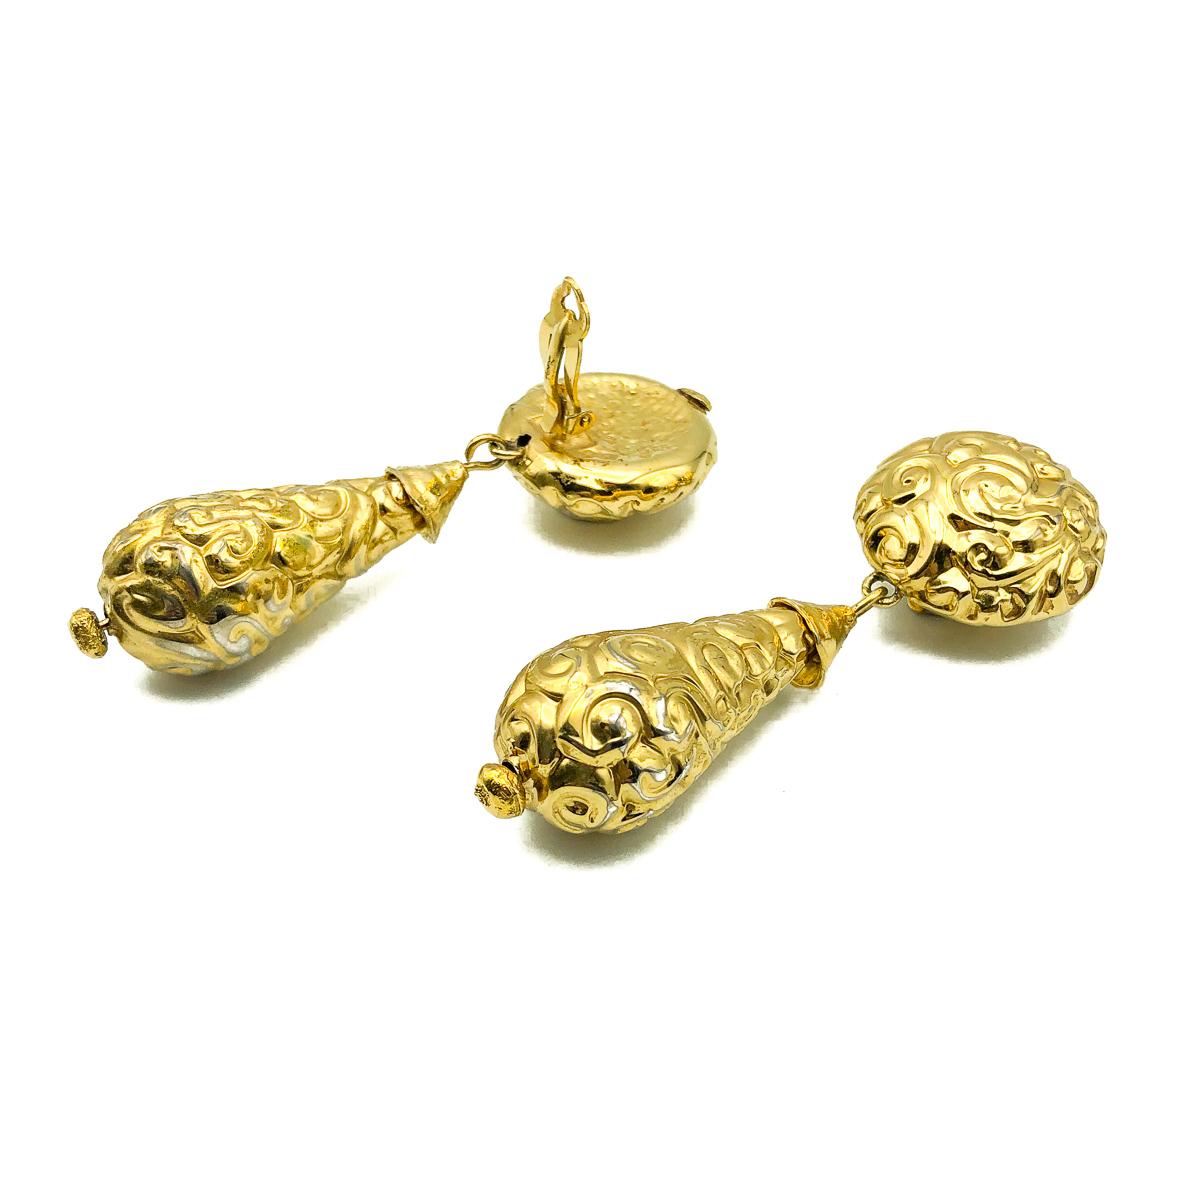 A magnificent pair of Vintage YSL Bomb Earrings. Crafted in gold plated metal. A large bomb style drop hangs from a button style clip on top. In very good vintage condition, signed, a very long approx. 9cm drop. An incredible pair of timeless